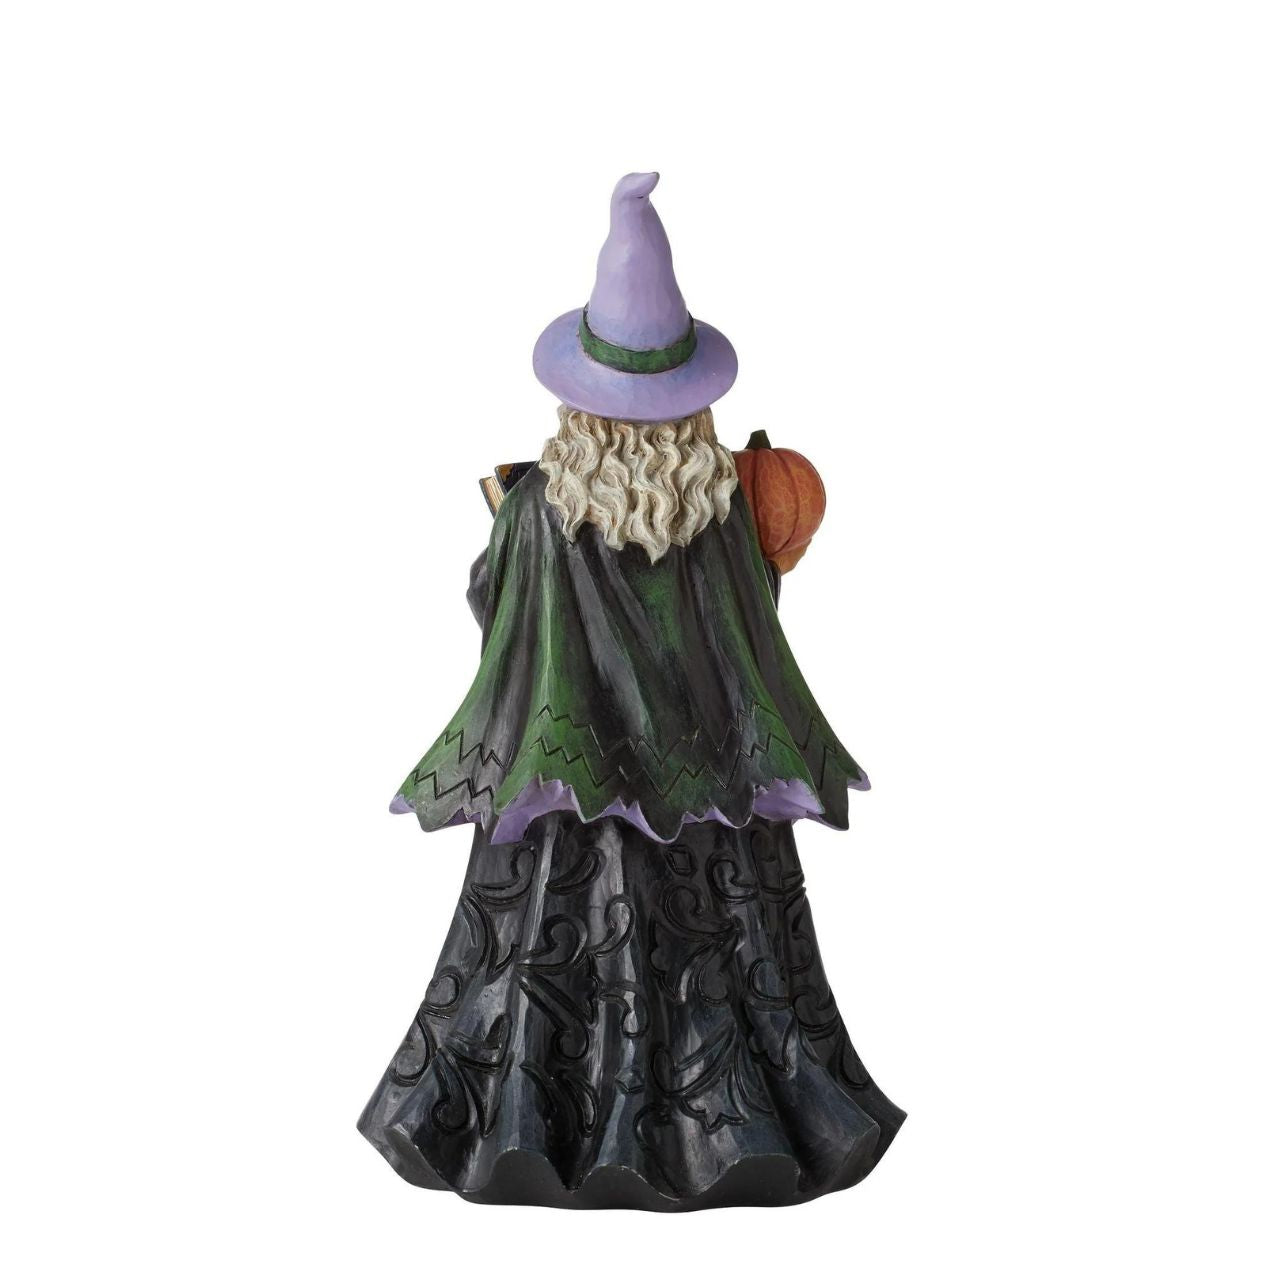 Friendly Witch Figurine Heartwood Creek by Jim Shore  Handcrafted in breathtaking detail, this beautiful Friendly Witch Figurine is beautifully decorated in Jim Shore's subtle combination of traditional quilt. This spellbinding Jim Shore sorcerer holds a jack-o-lantern and potions book in her ghoulish grip.